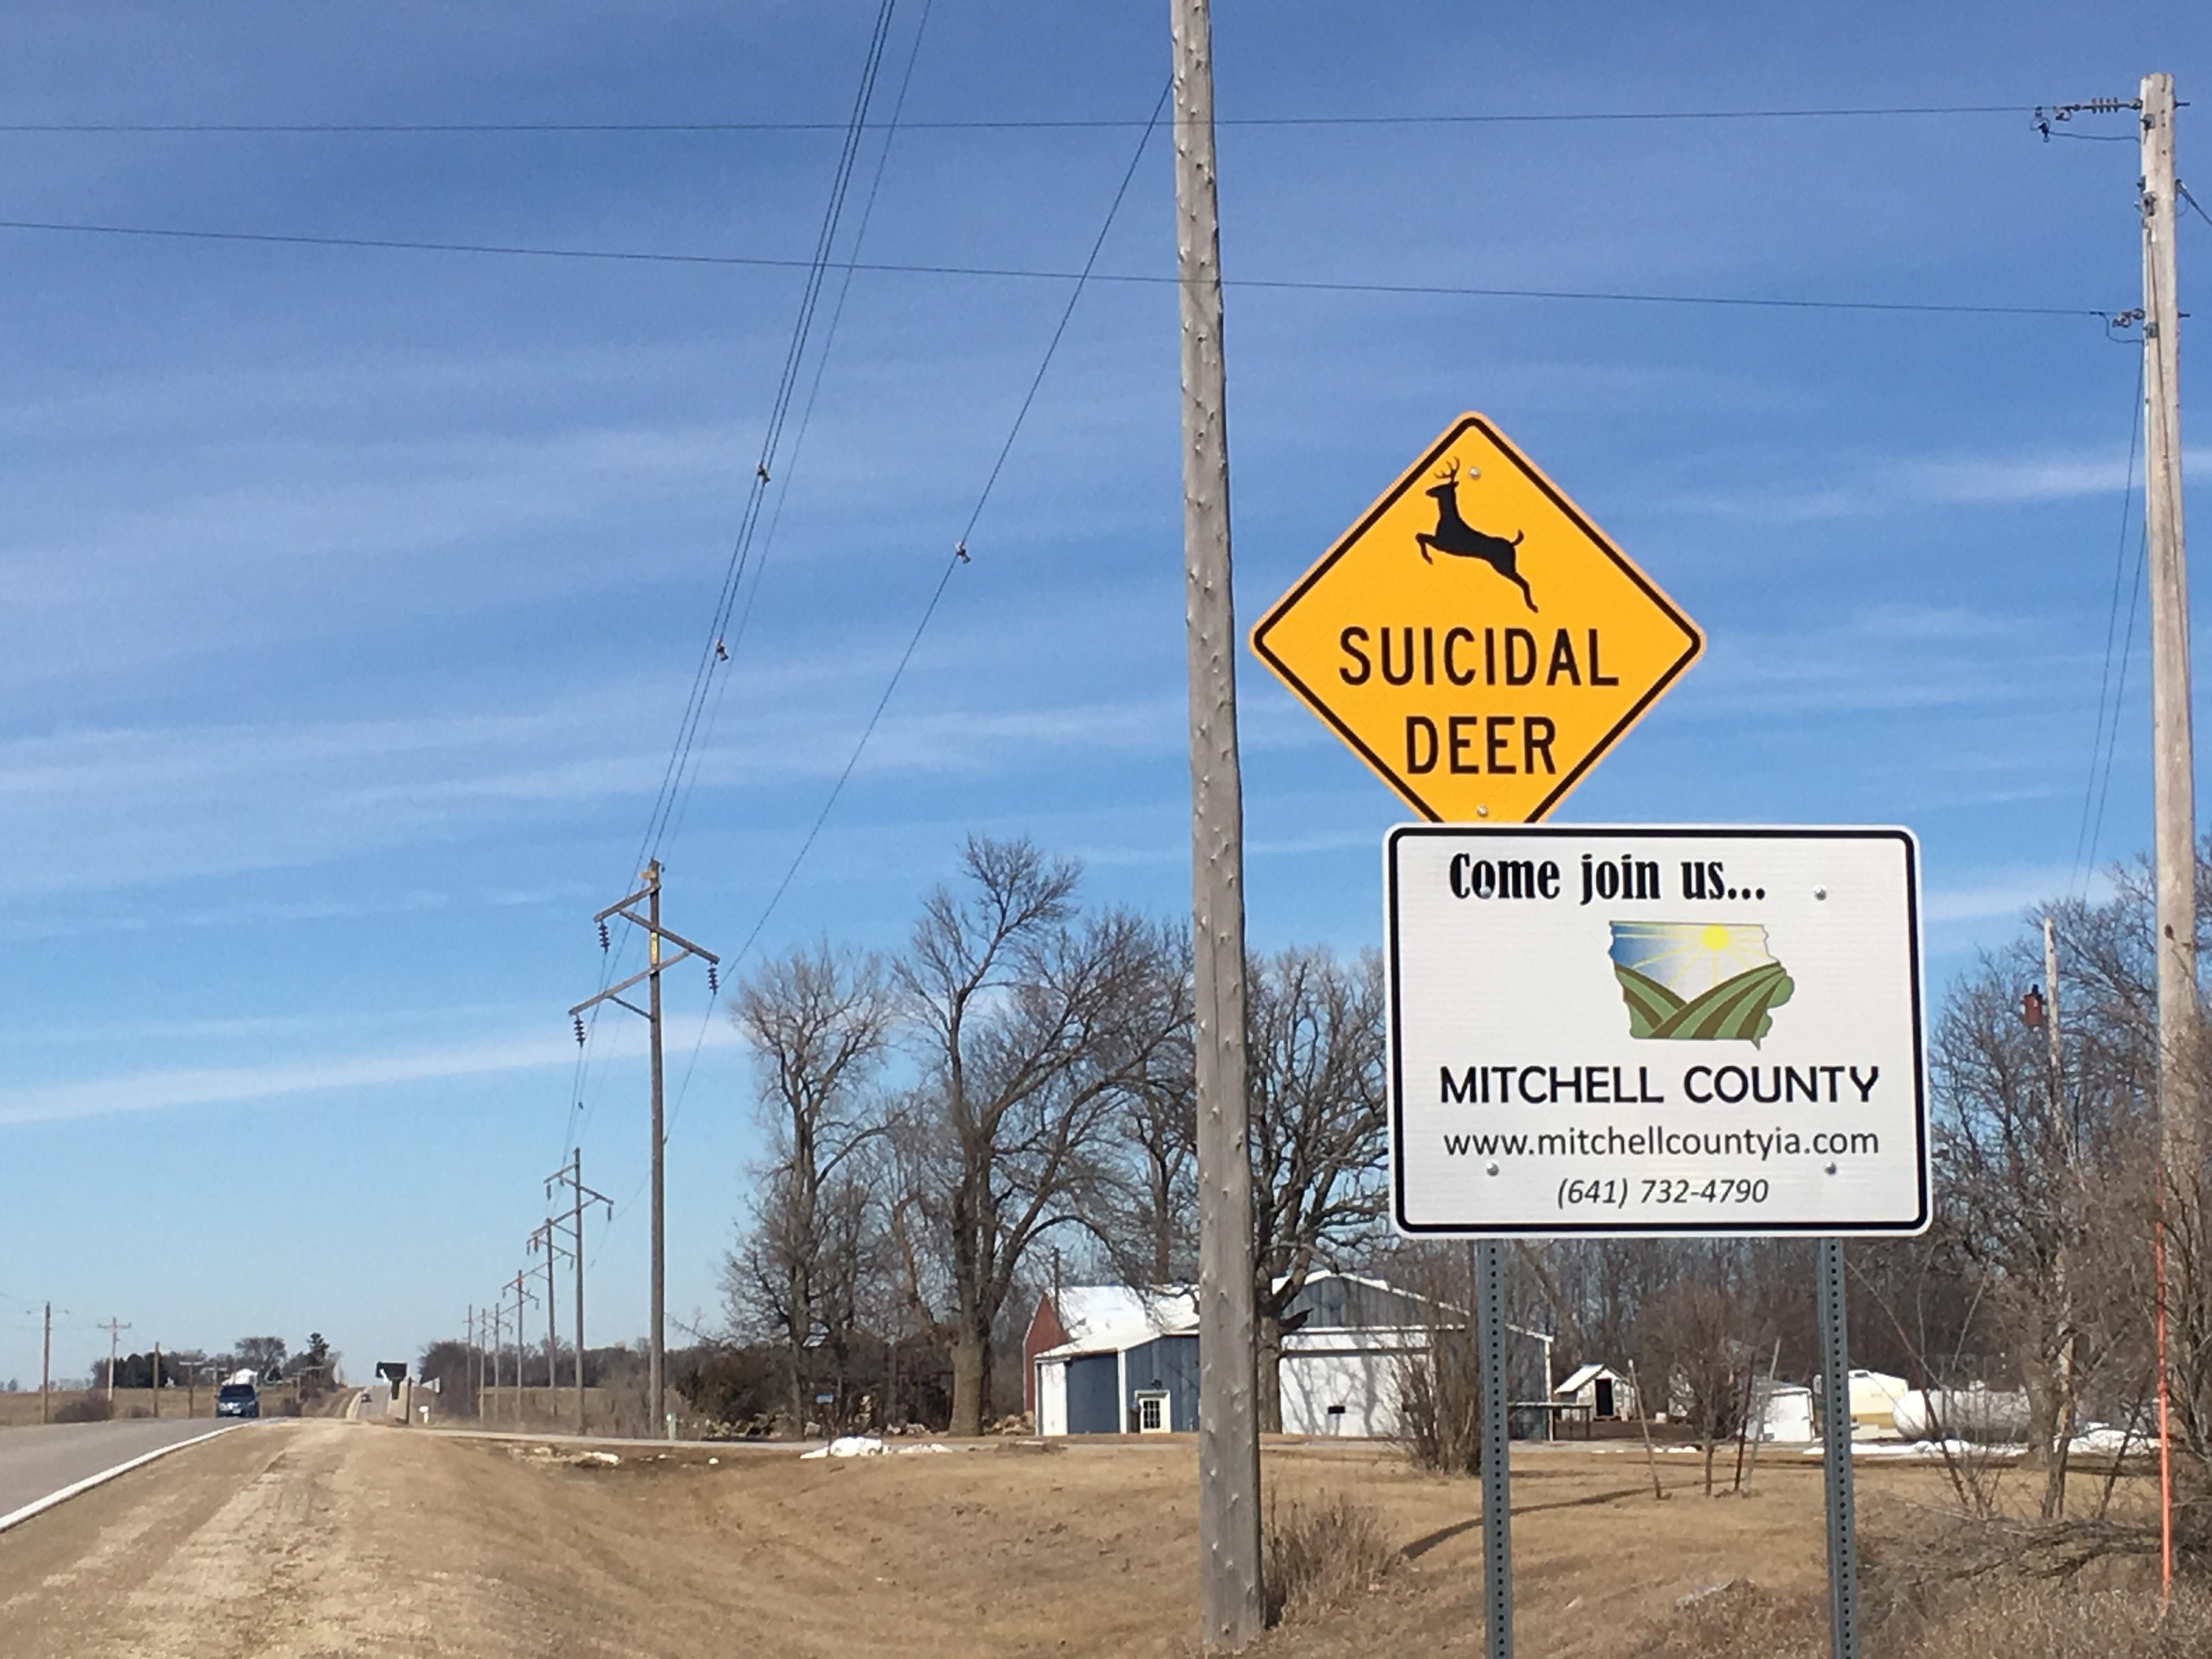 Found this sign in Iowa. Even the deer hate living here.